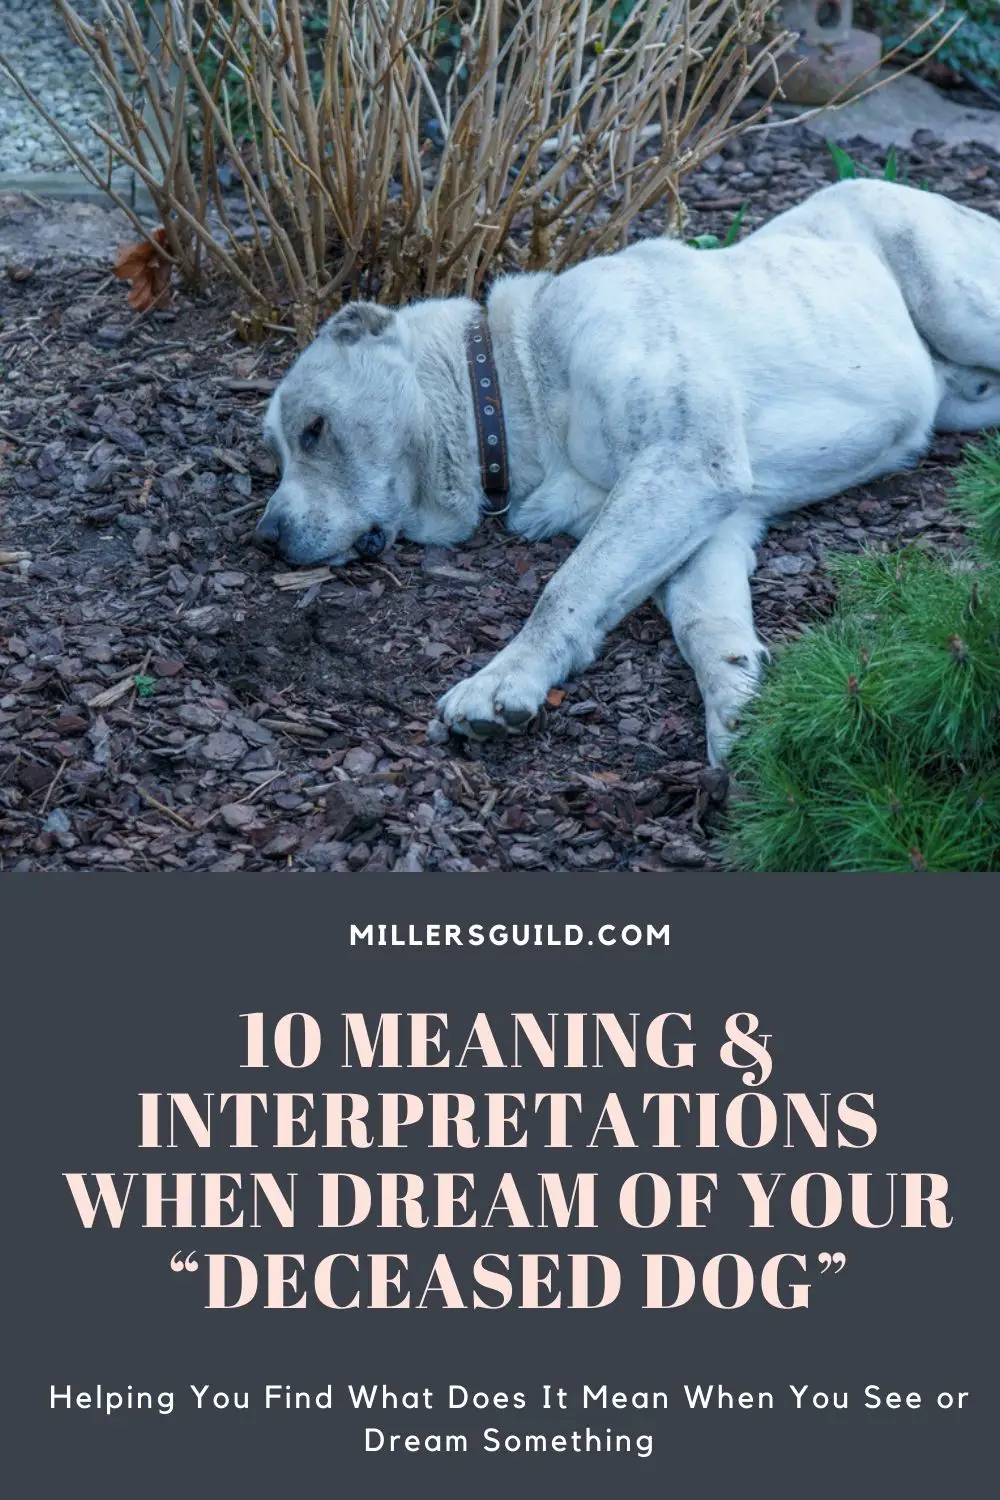 Common Symbolic Meanings Of Dog Drowning Dreams